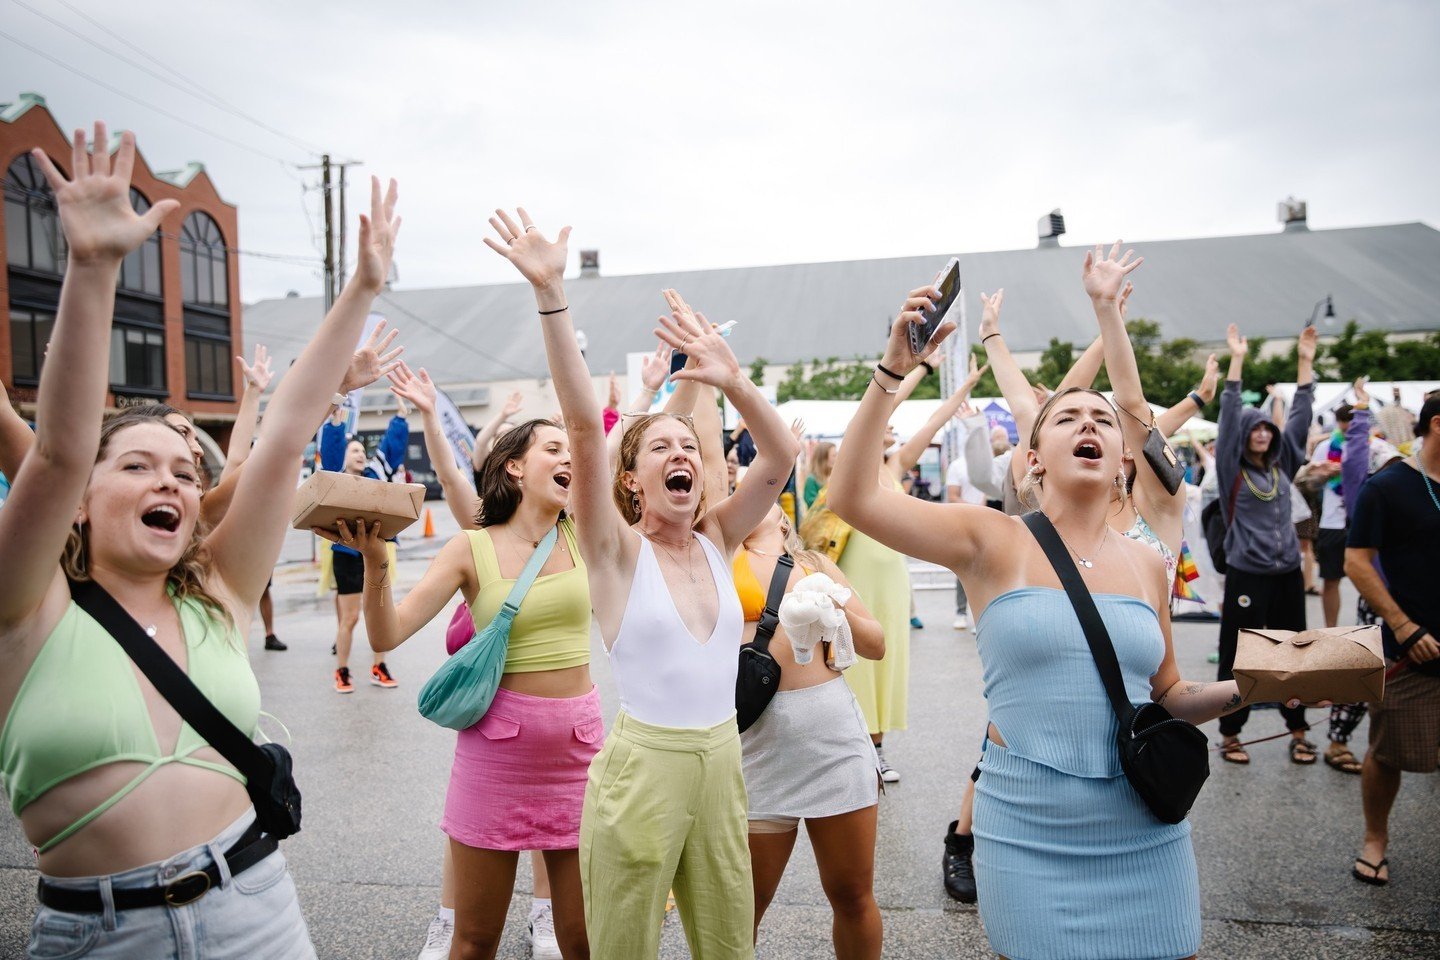 Raise your hand if you can't wait for #CWPride24!! 🌈 🙋🏼 ⁠
⁠
What's the highlight of the Collingwood Pride Festival for you? Let us know in the comments! 👇🏽⁠